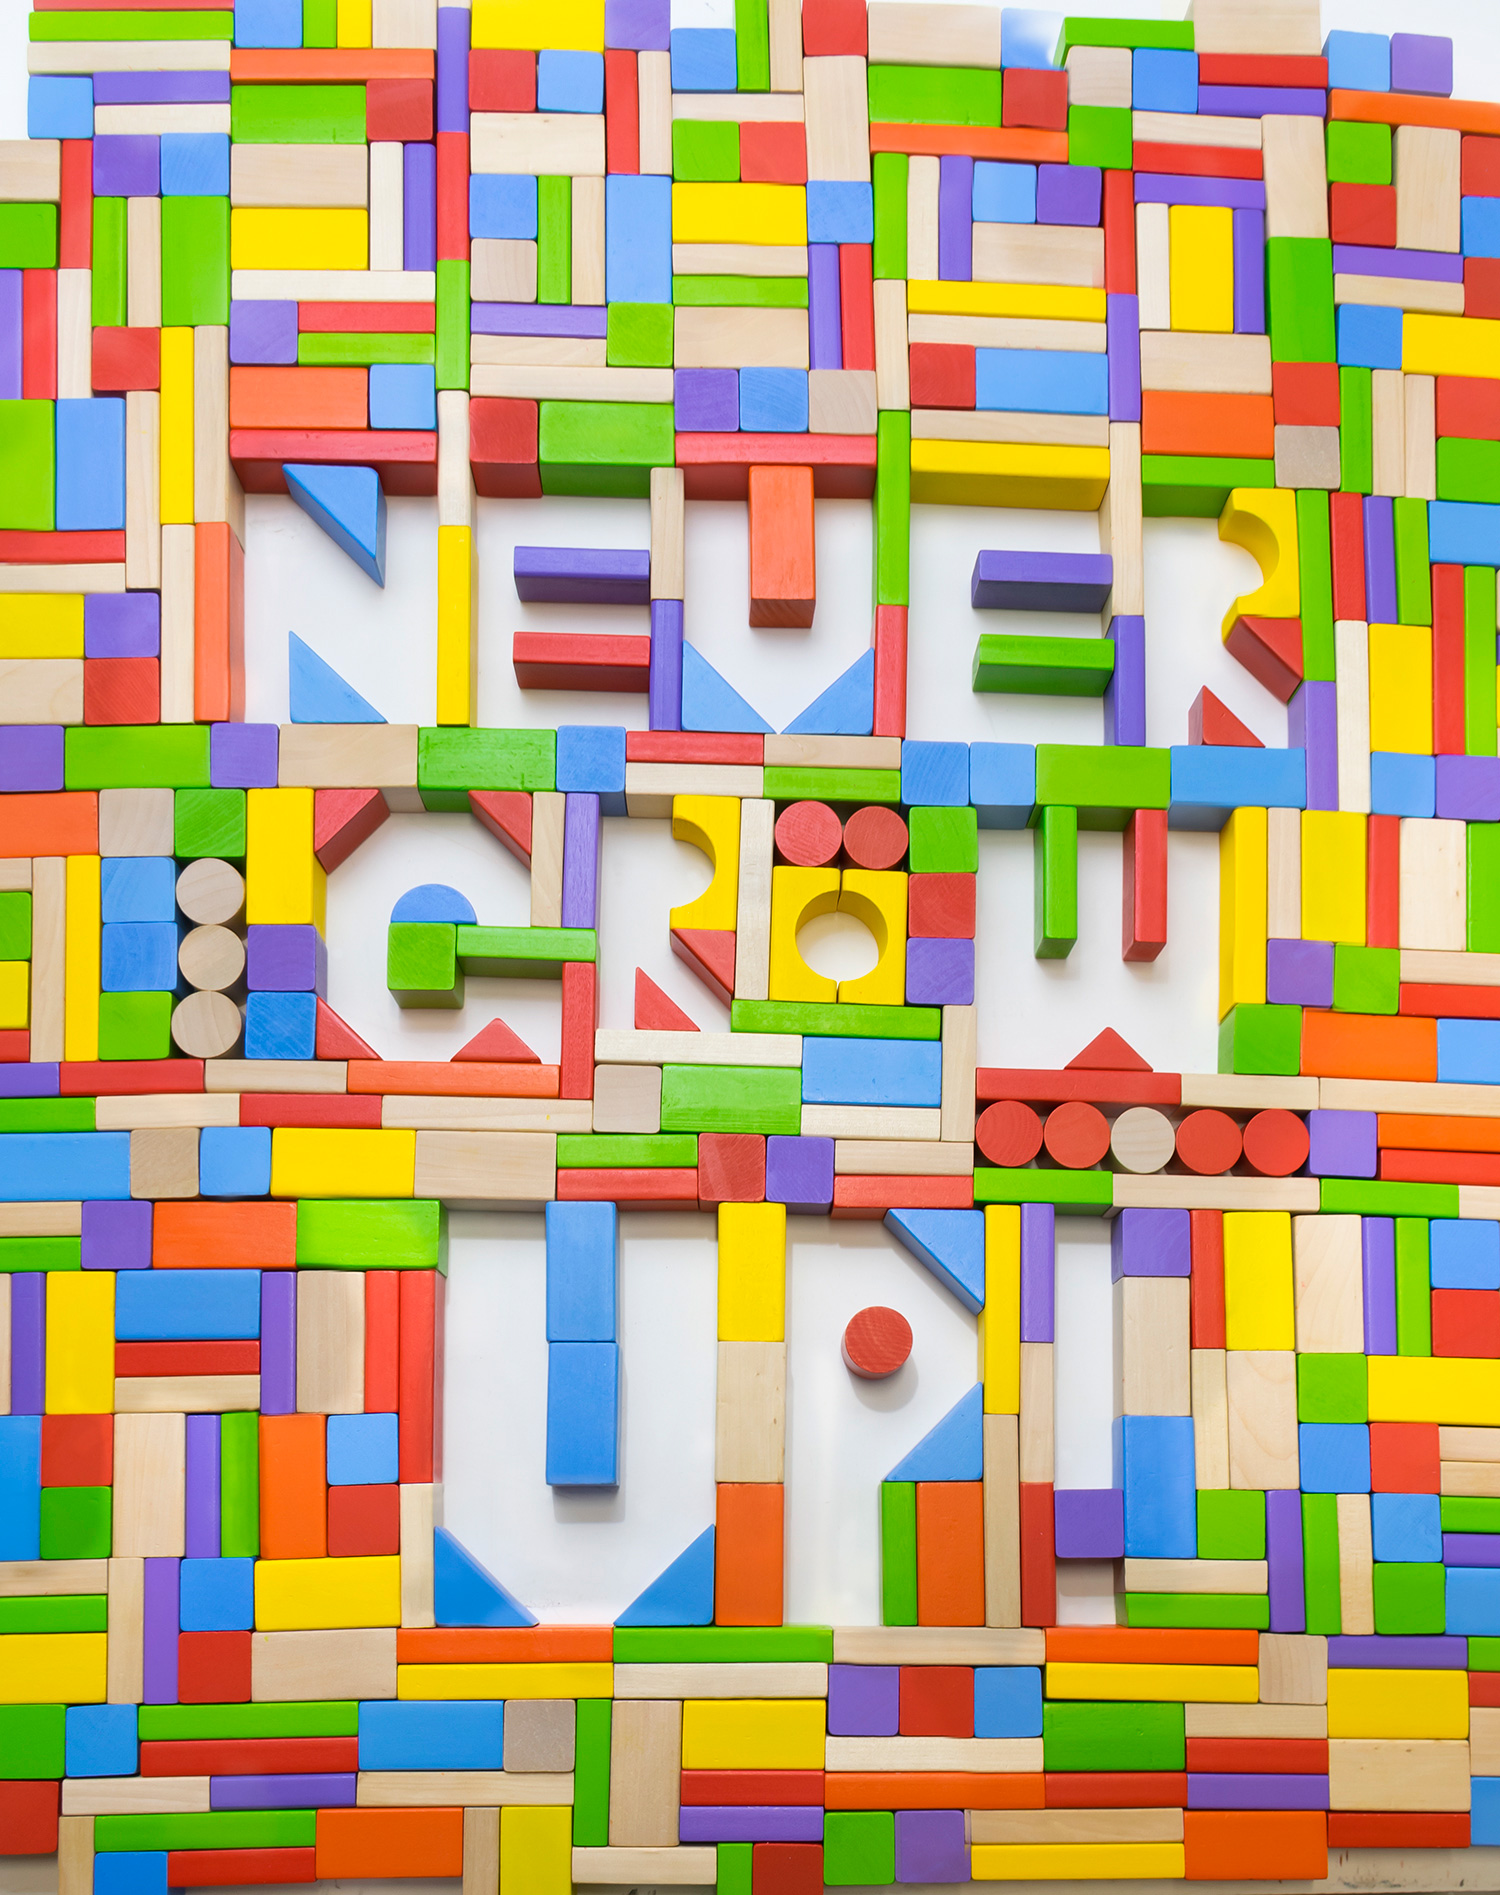 "Never Grow Up" by Courtney Lamb